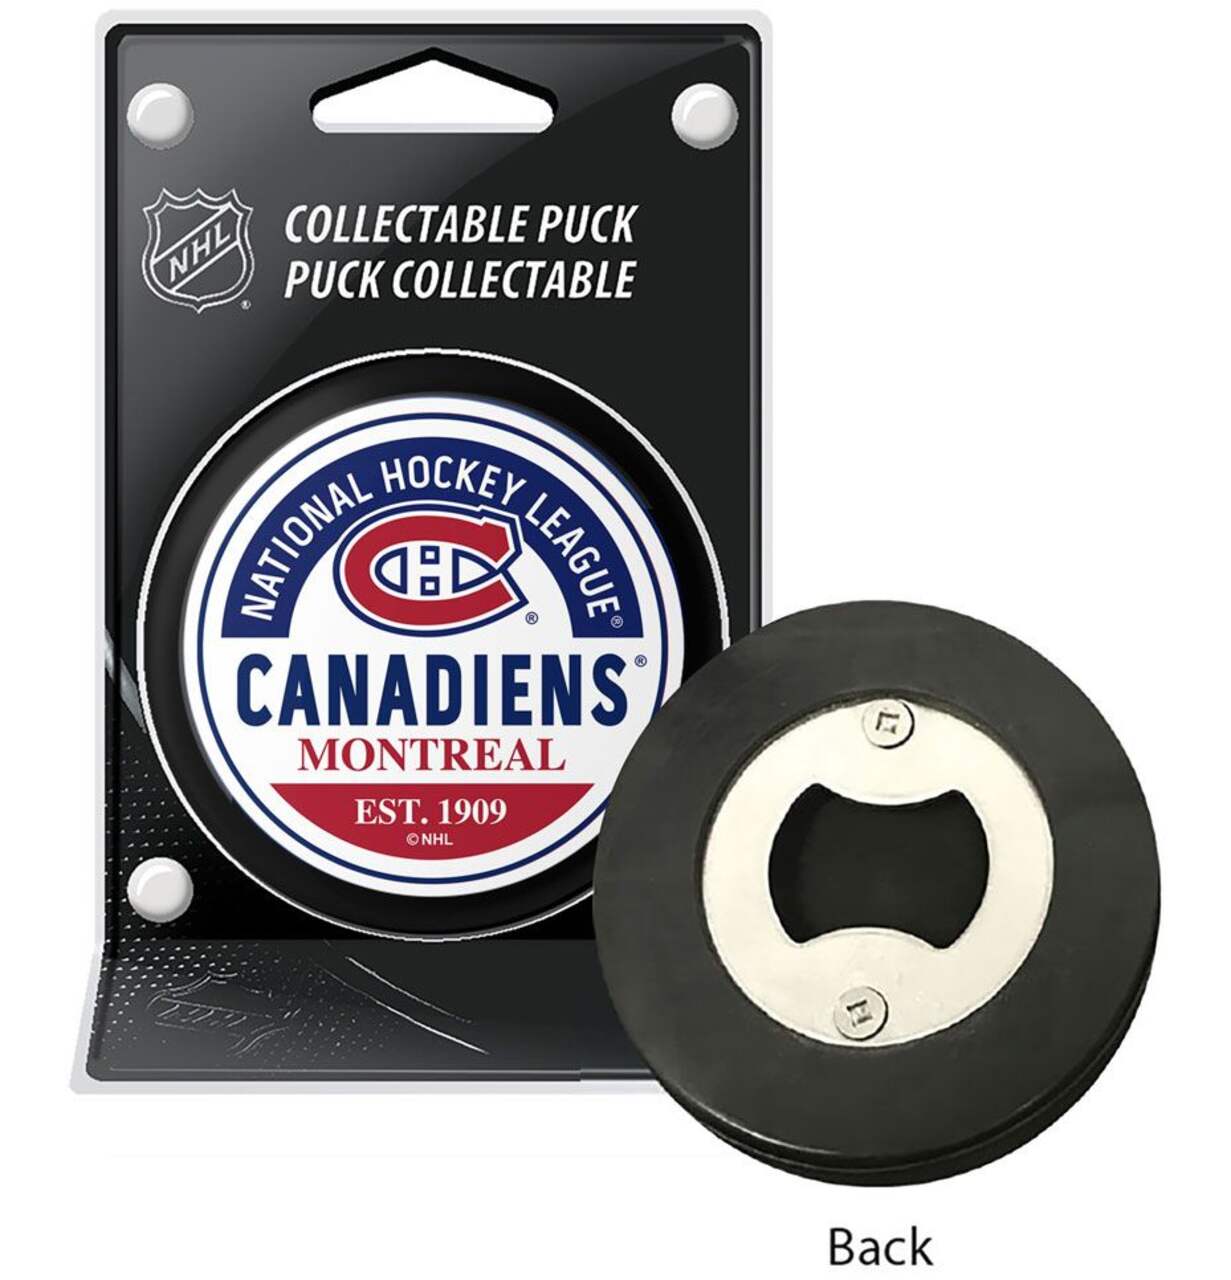 https://media-www.canadiantire.ca/product/playing/hockey/hockey-accessories/1831841/montreal-canadiens-embedded-bottle-opener-puck-e9201c7f-744d-4881-83ab-67b681916fe0-jpgrendition.jpg?imdensity=1&imwidth=640&impolicy=mZoom